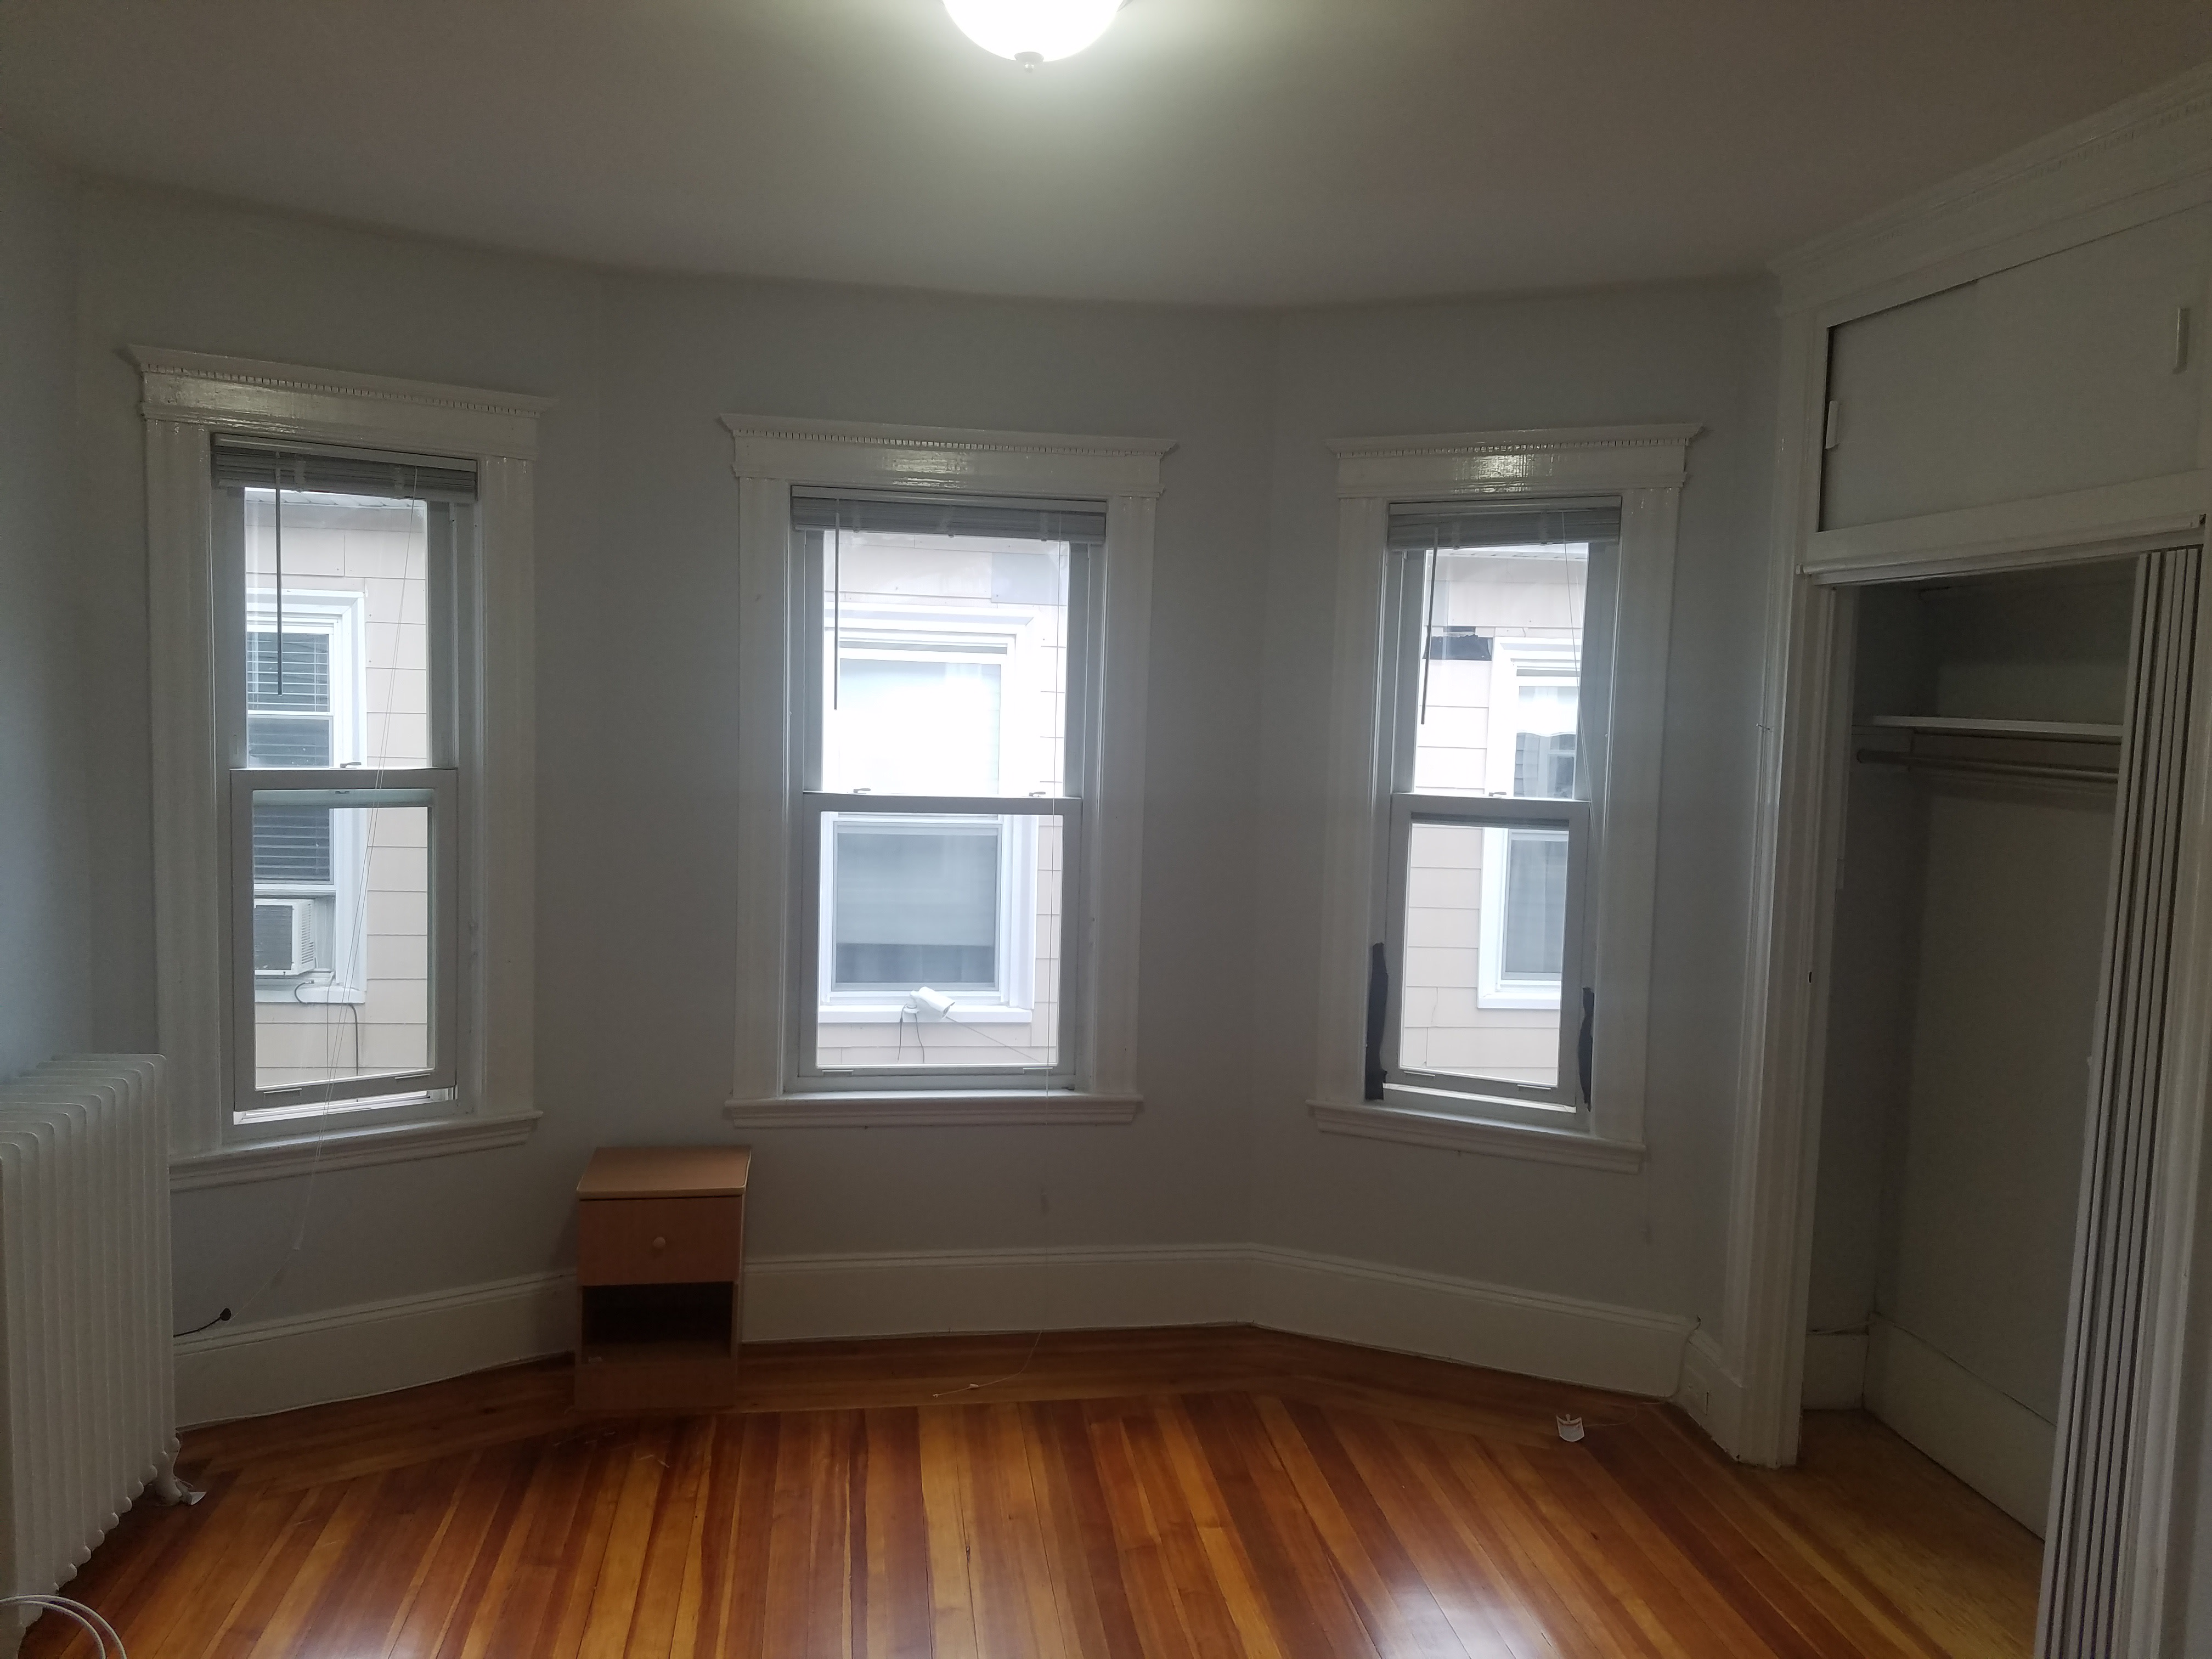 20 Best Apartments For Rent In Milton Ma With Pictures